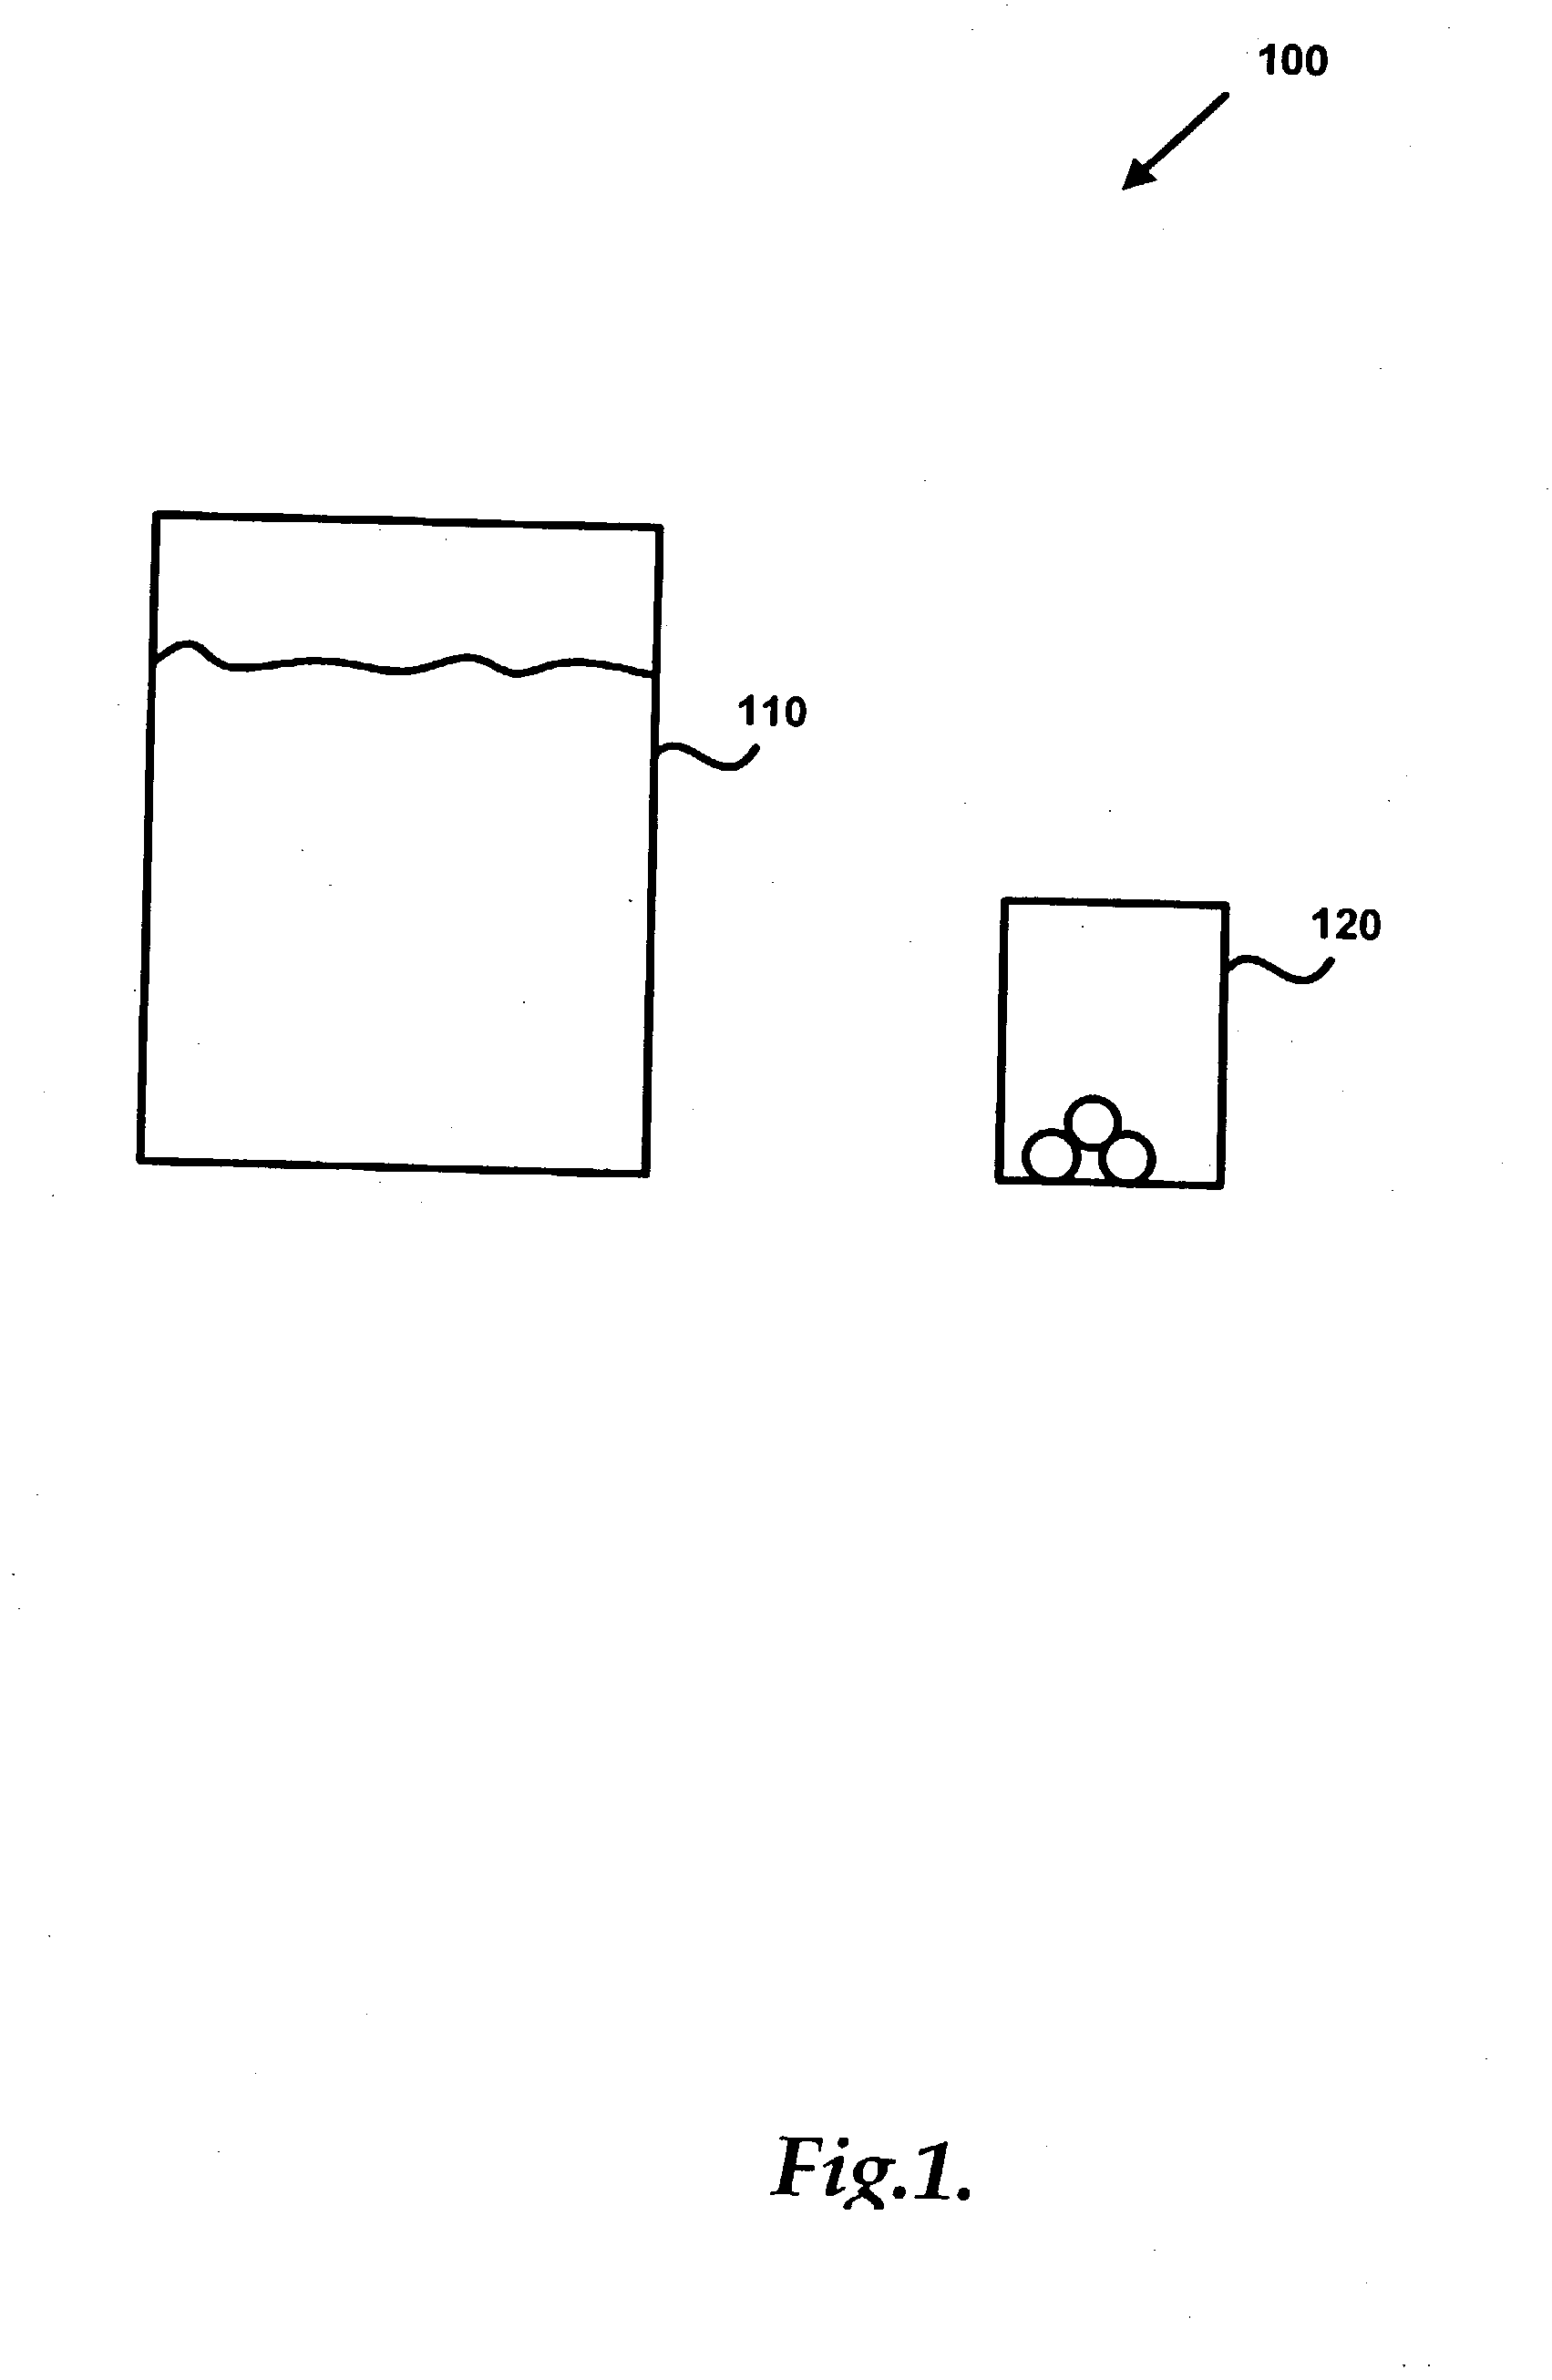 Water treatment compositions with masking agent